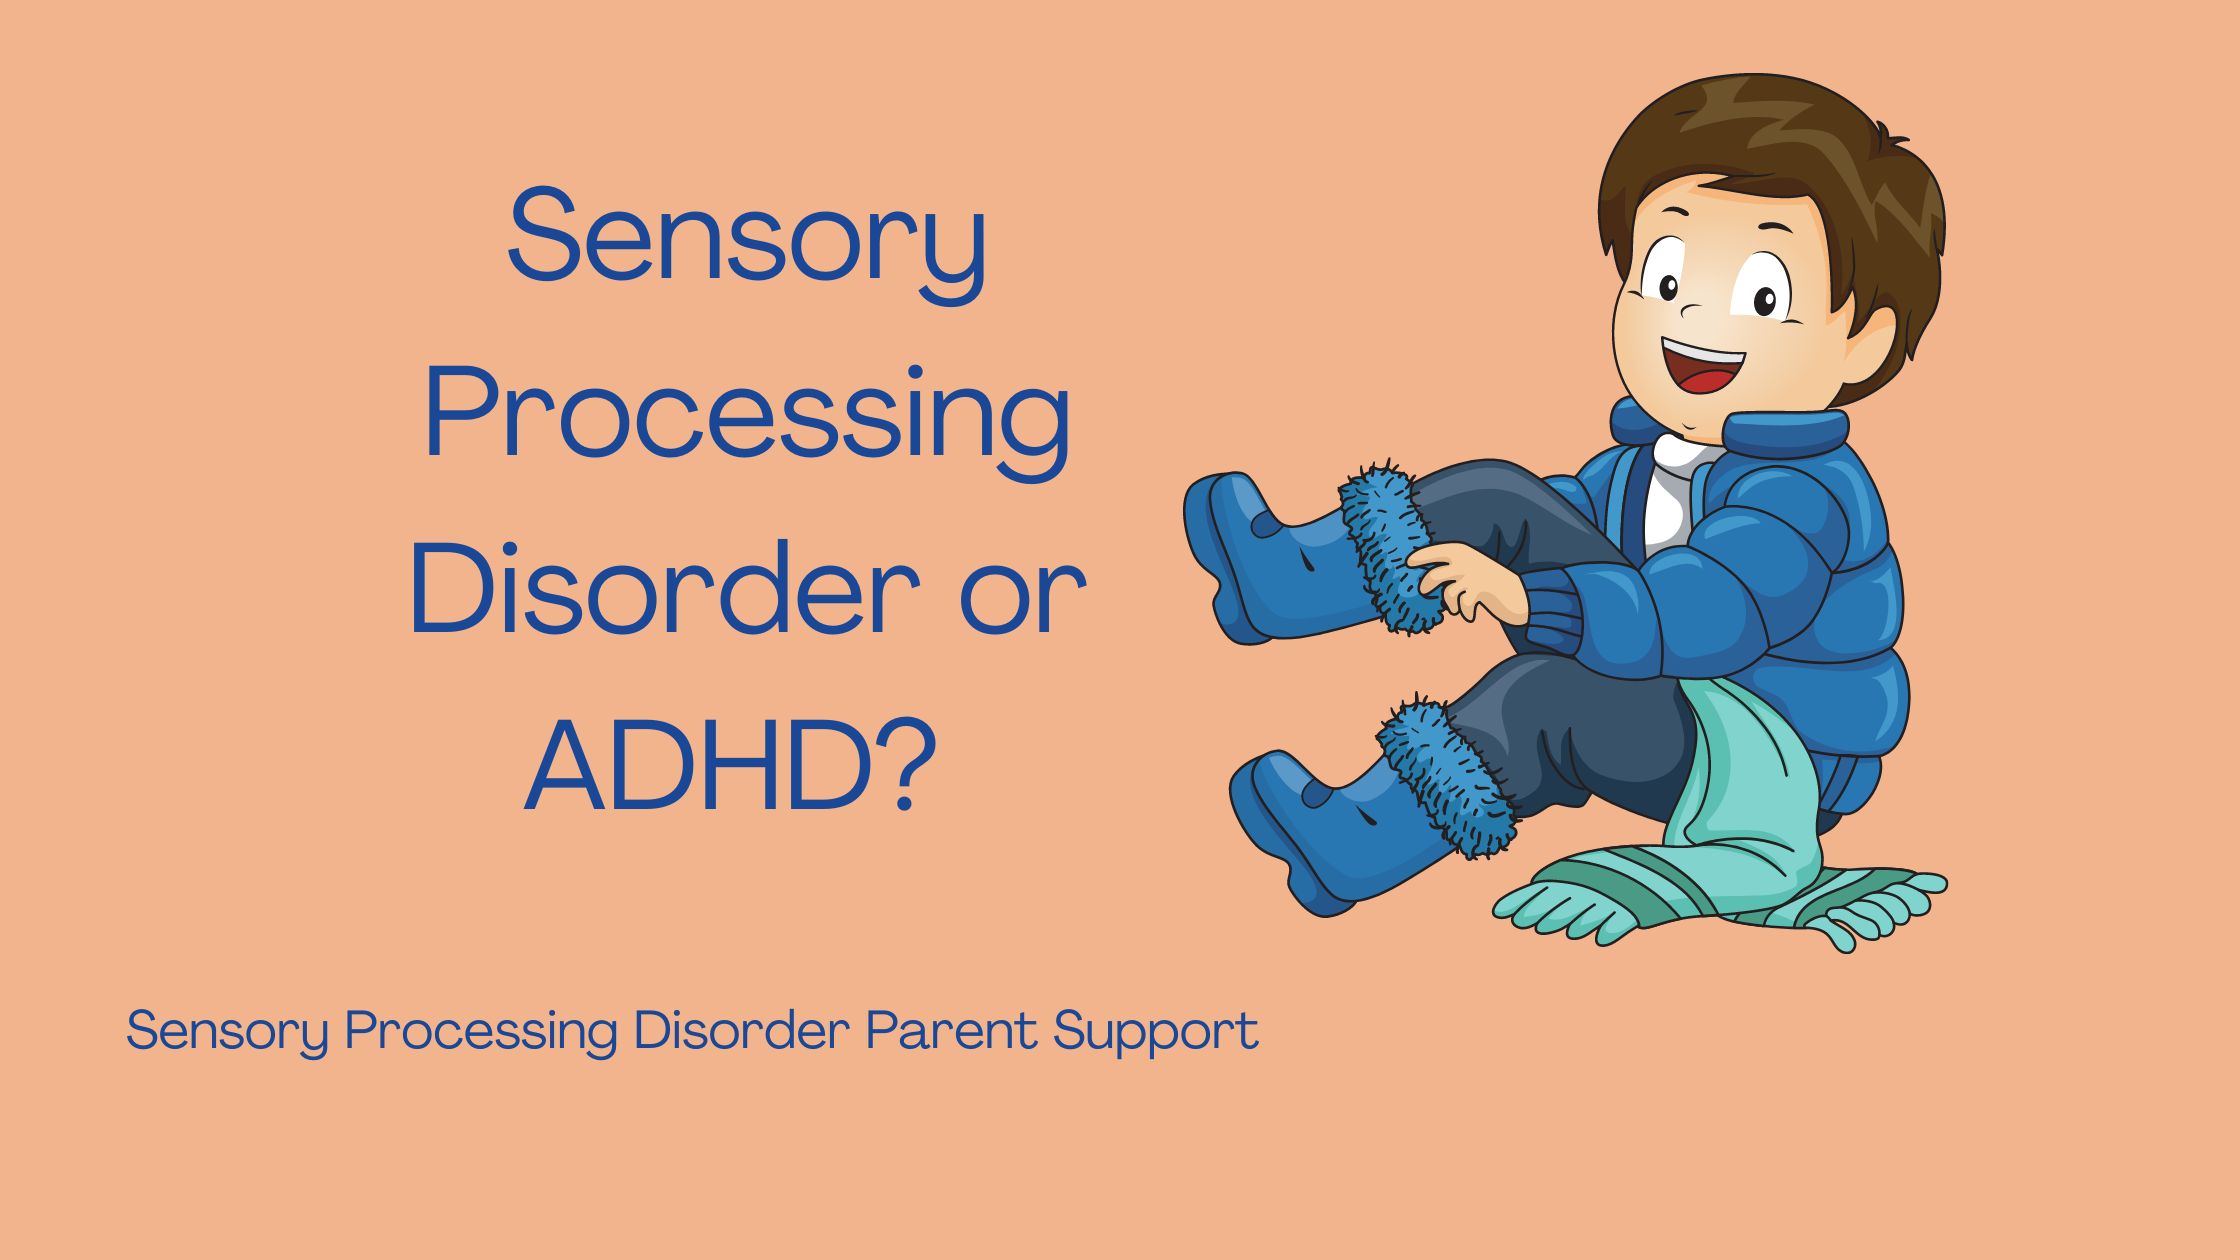 child  with ADHD and sensory processing disorder getting dressed Sensory Processing Disorder or ADHD